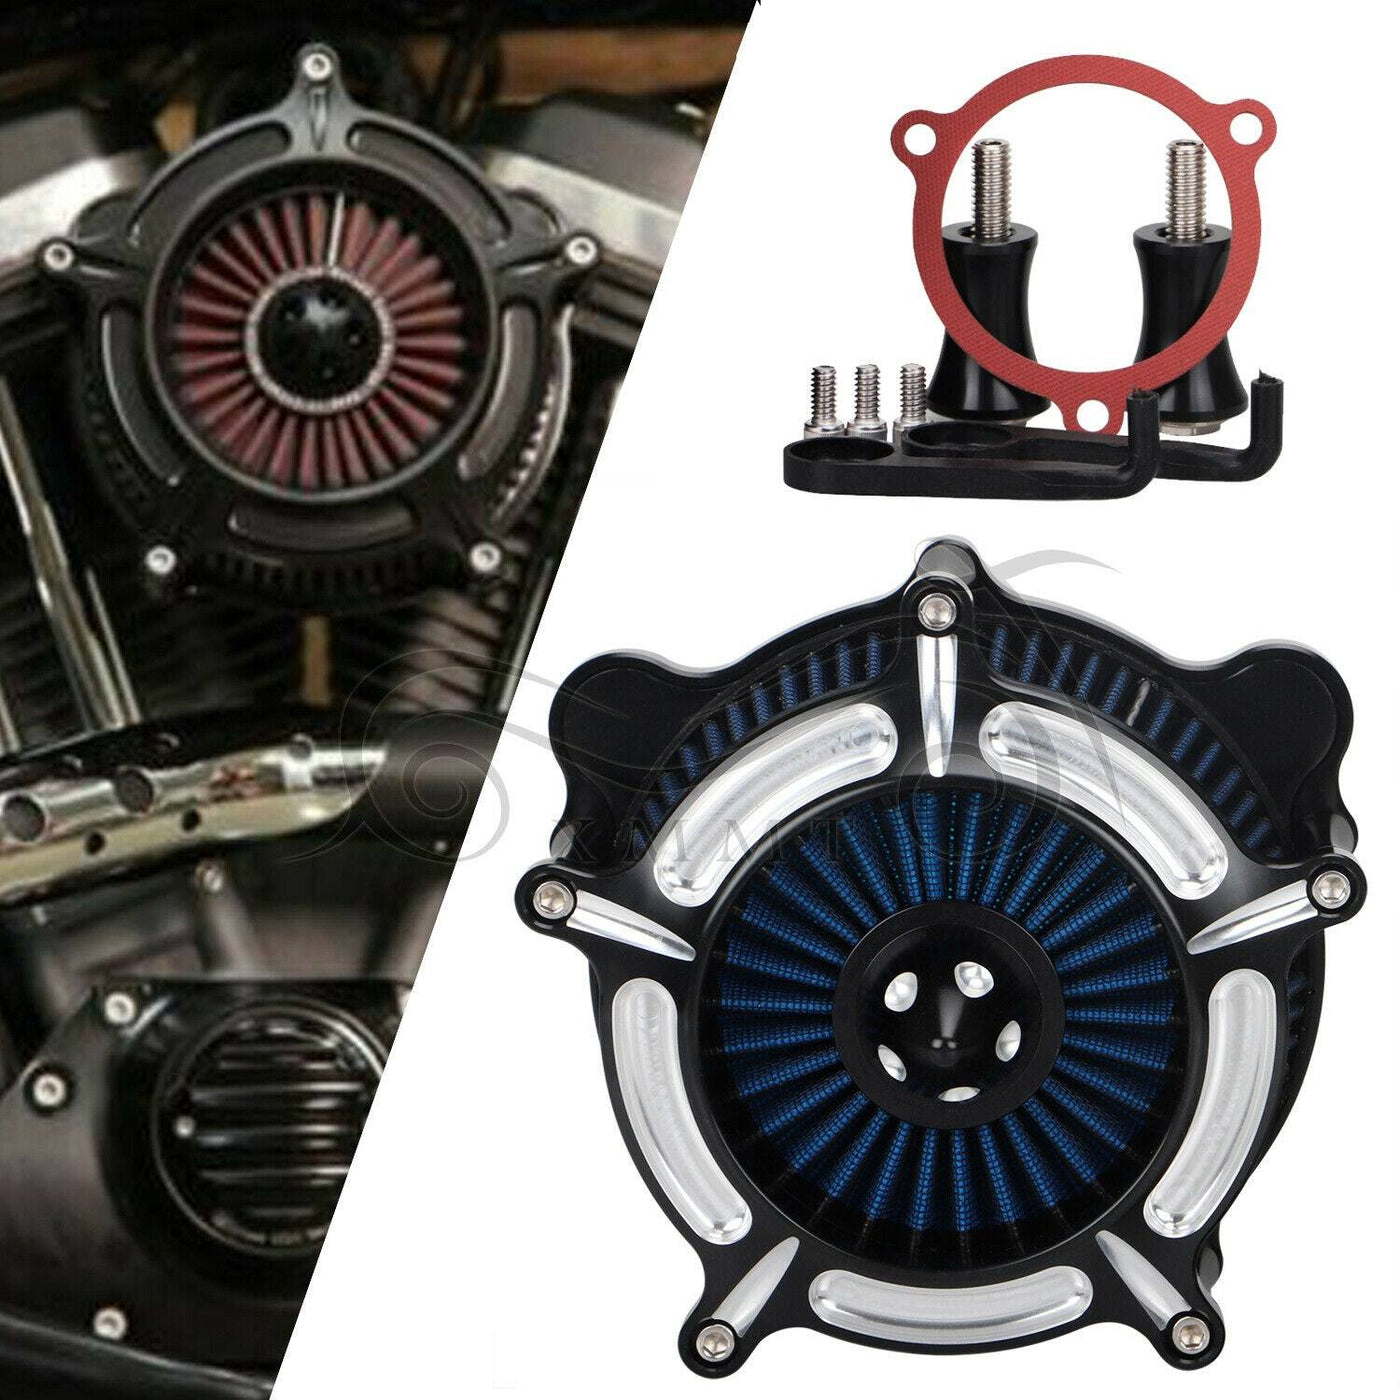 Turbine Air Cleaner Intake Filter For Harley Street Glide Road King Dyna Softail - Moto Life Products